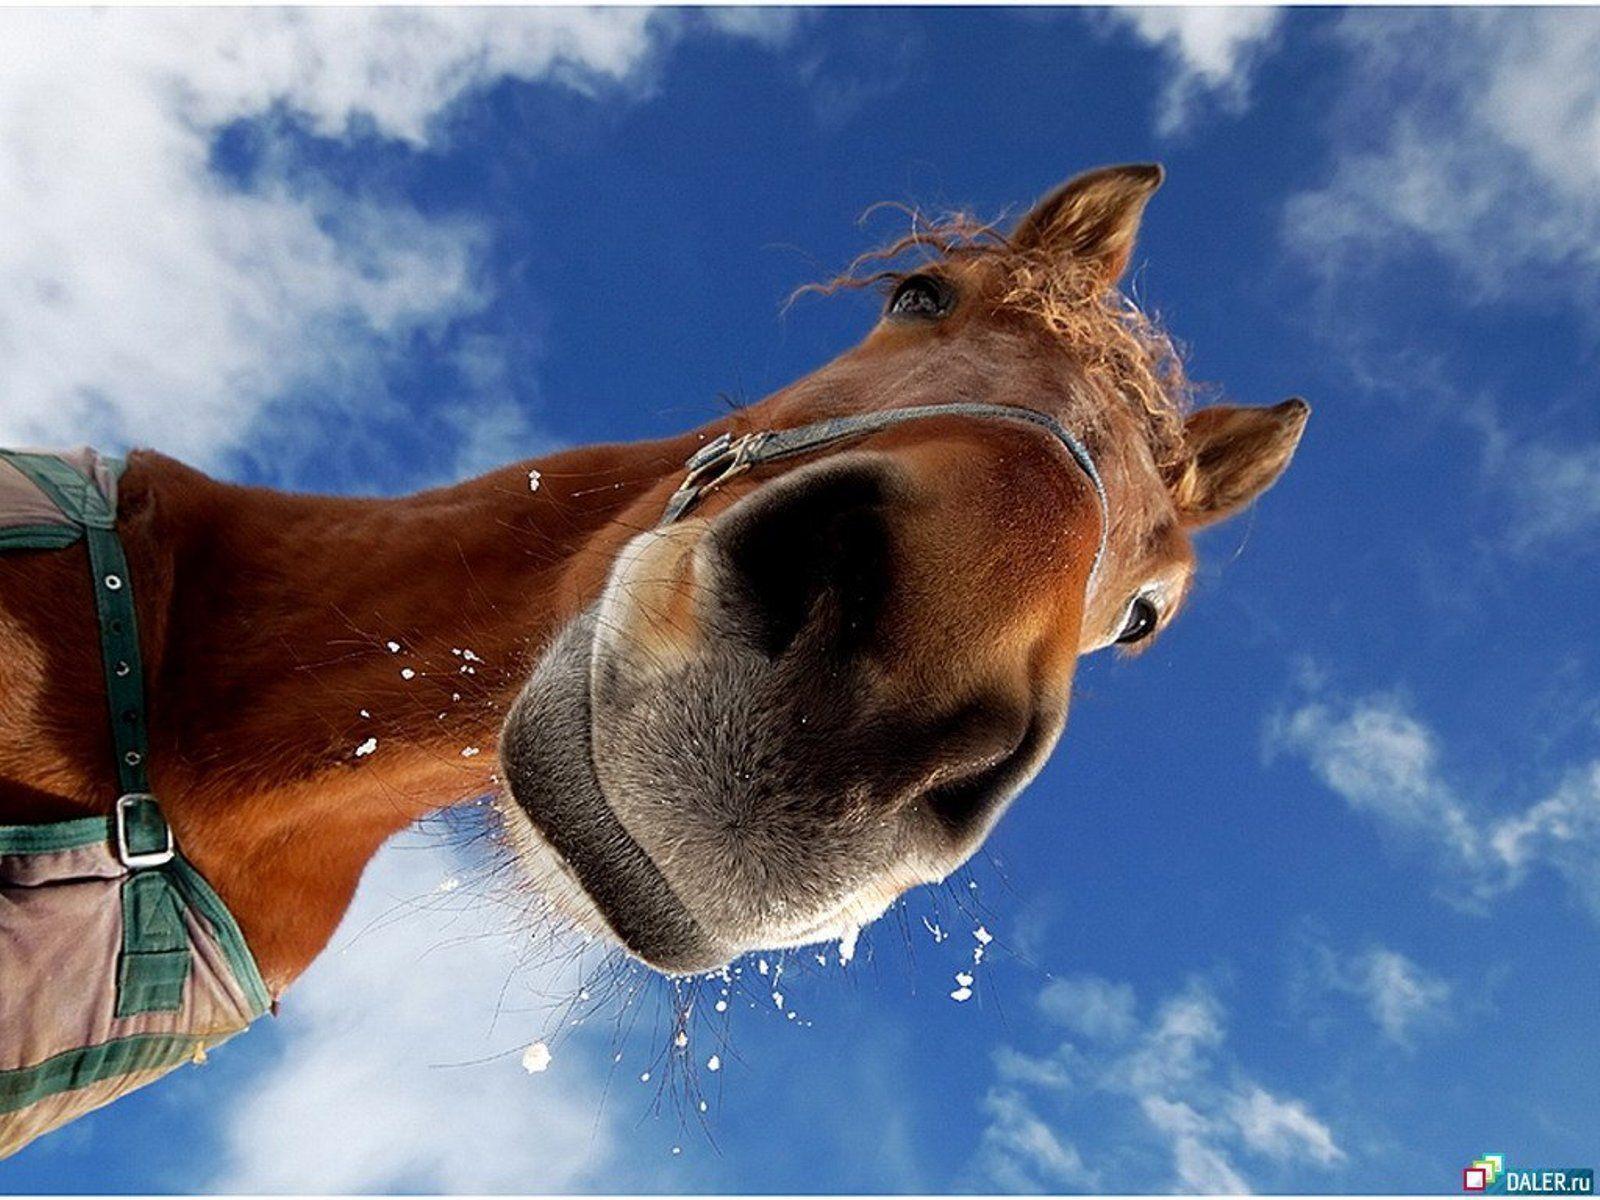 Cute Horse Wallpapers 68 images